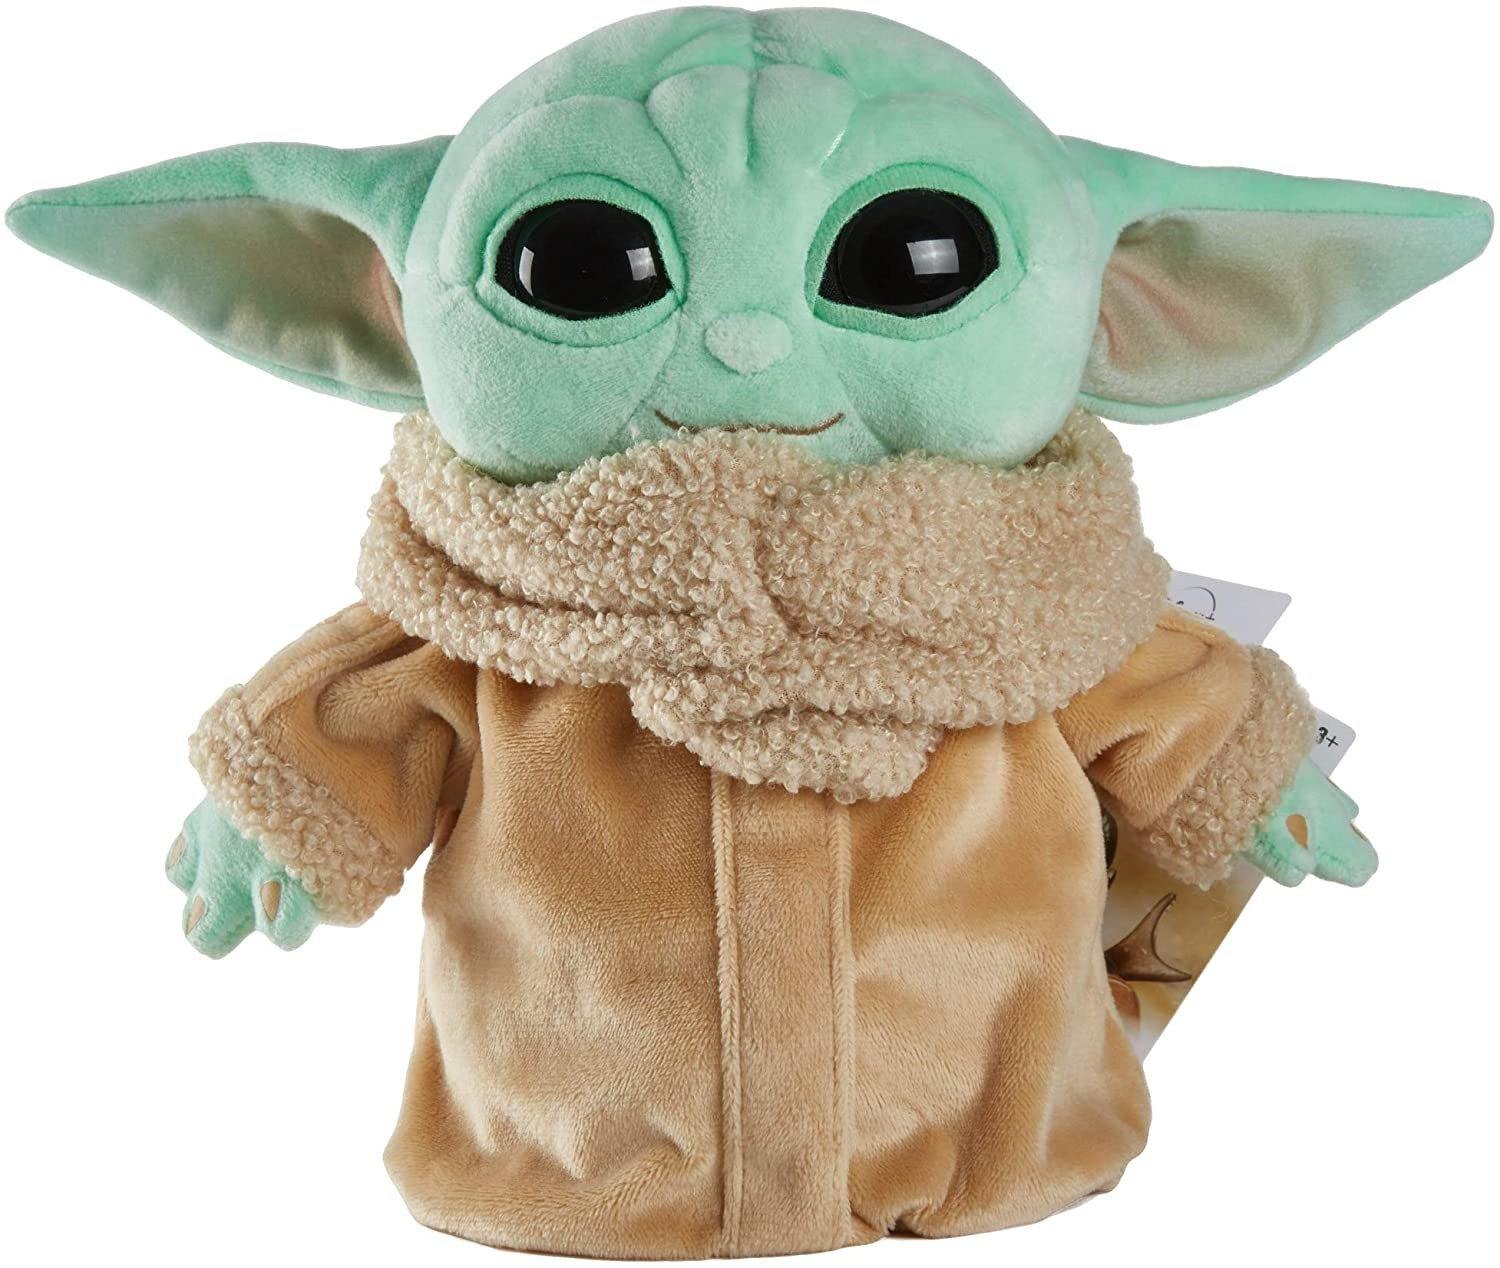 Star Wars The Child Plush Toy, 8-in